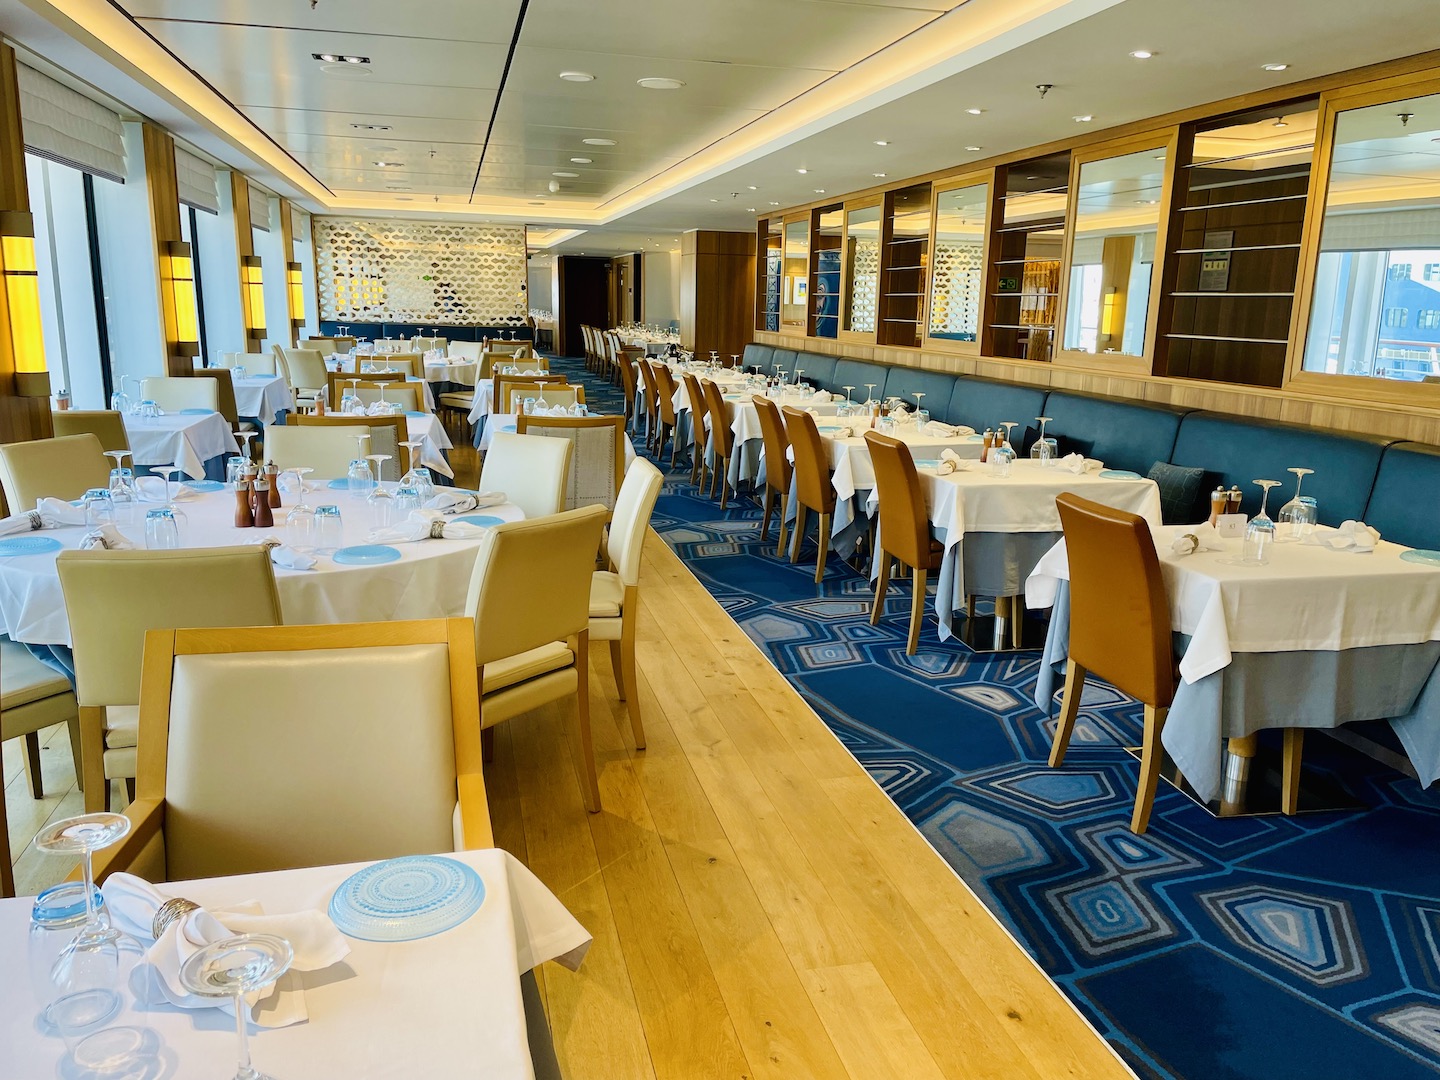 White tablecloths dress the tables surrounded by chairs at The Restaurant on a Viking Ocean cruise.